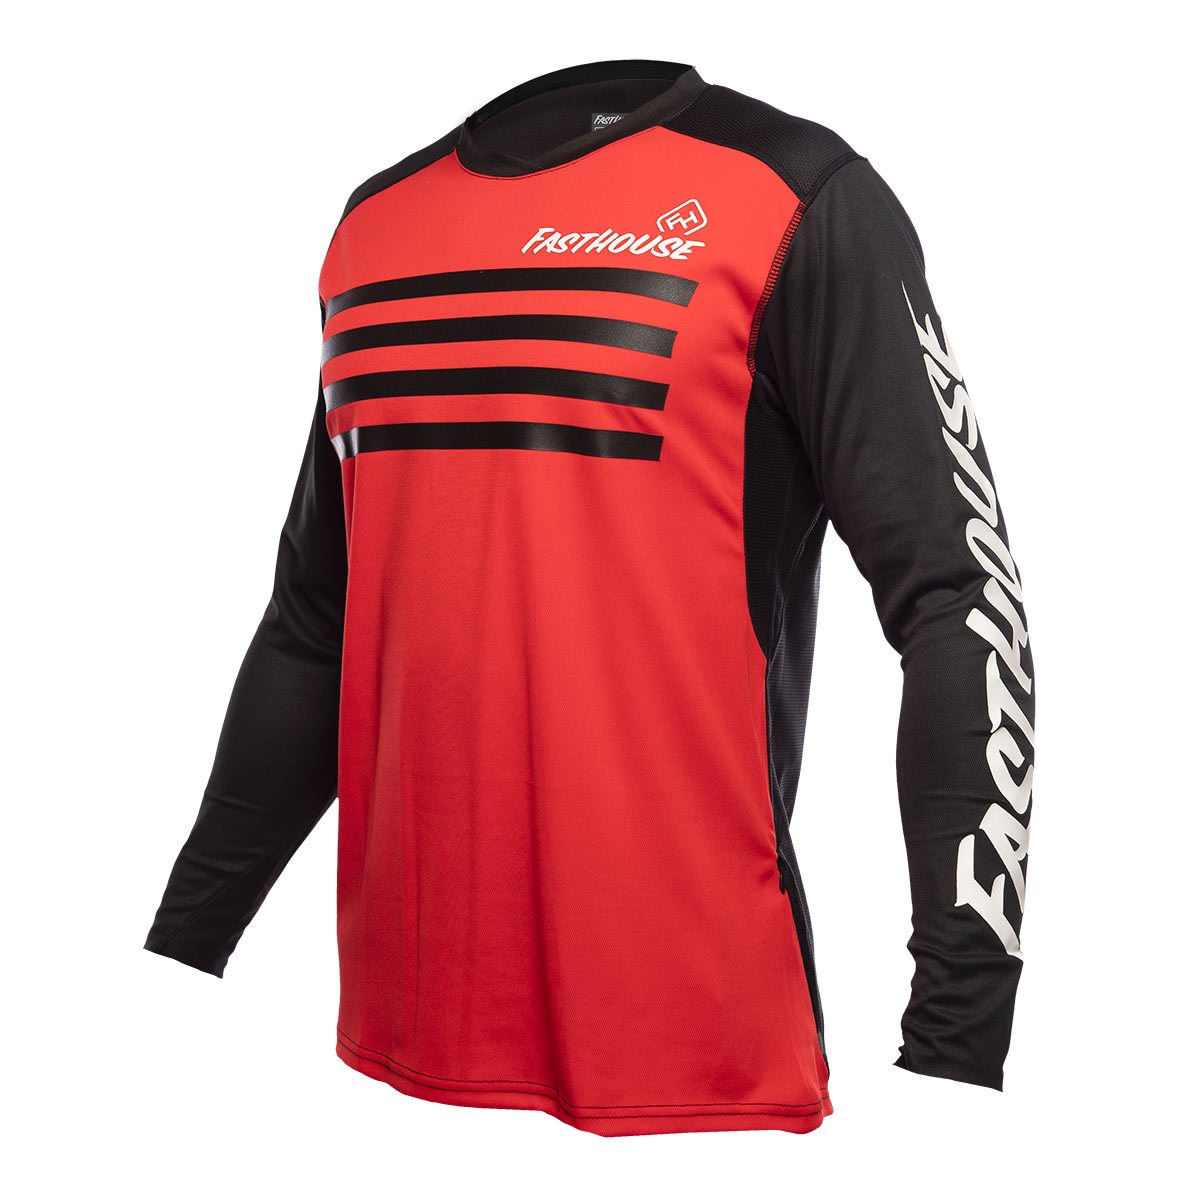 Fasthouse - Alloy Stripe LS Jersey - Red